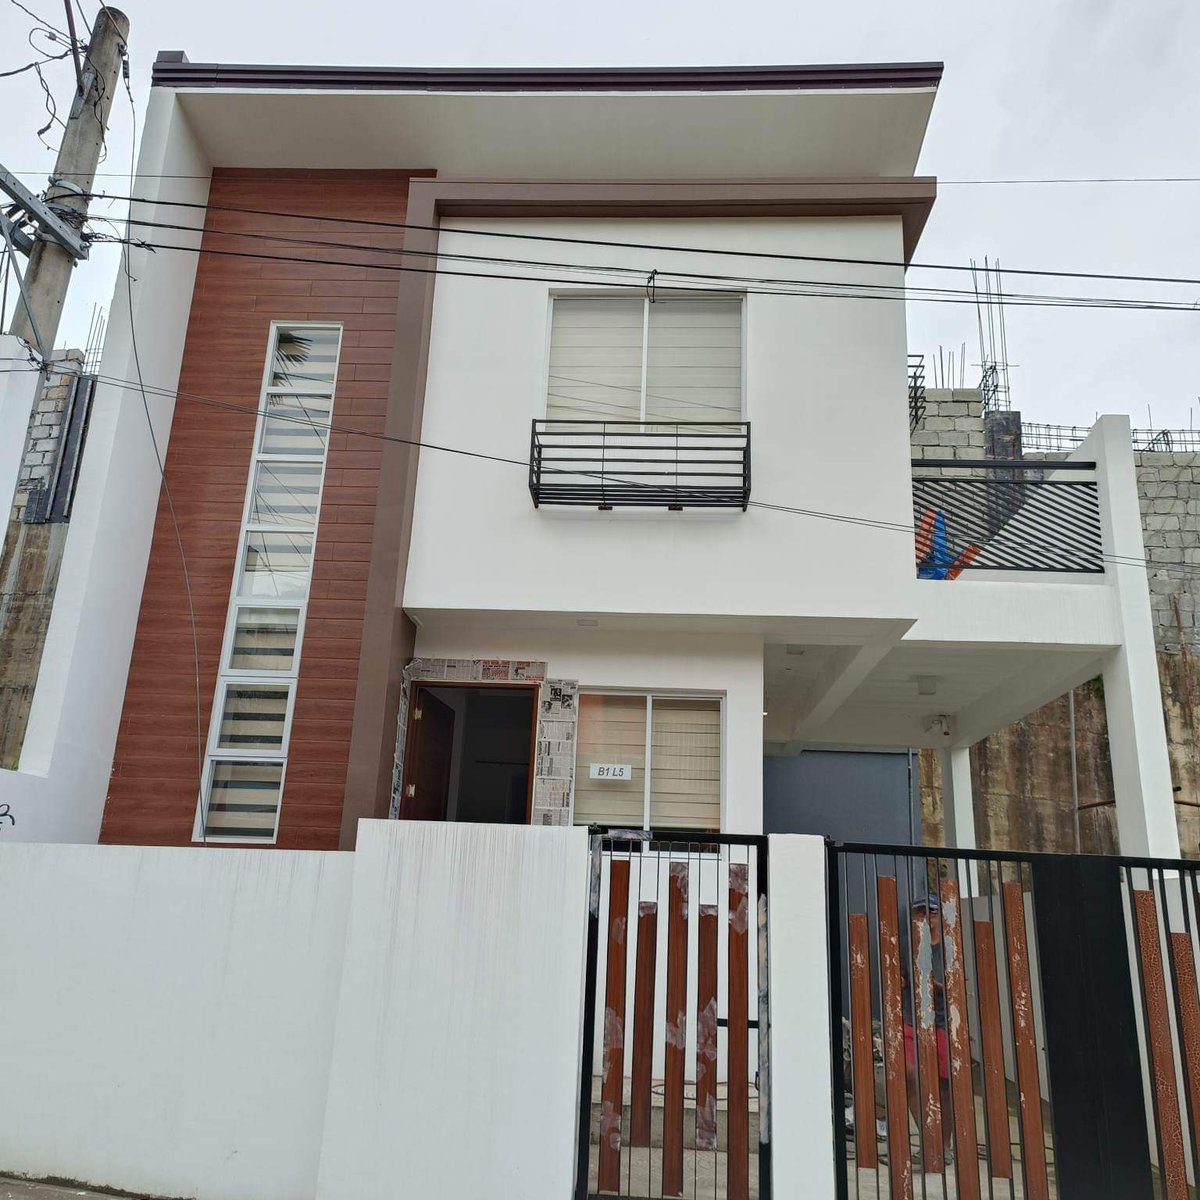 3 bedroom Townhouse For Sale in Angono Rizal